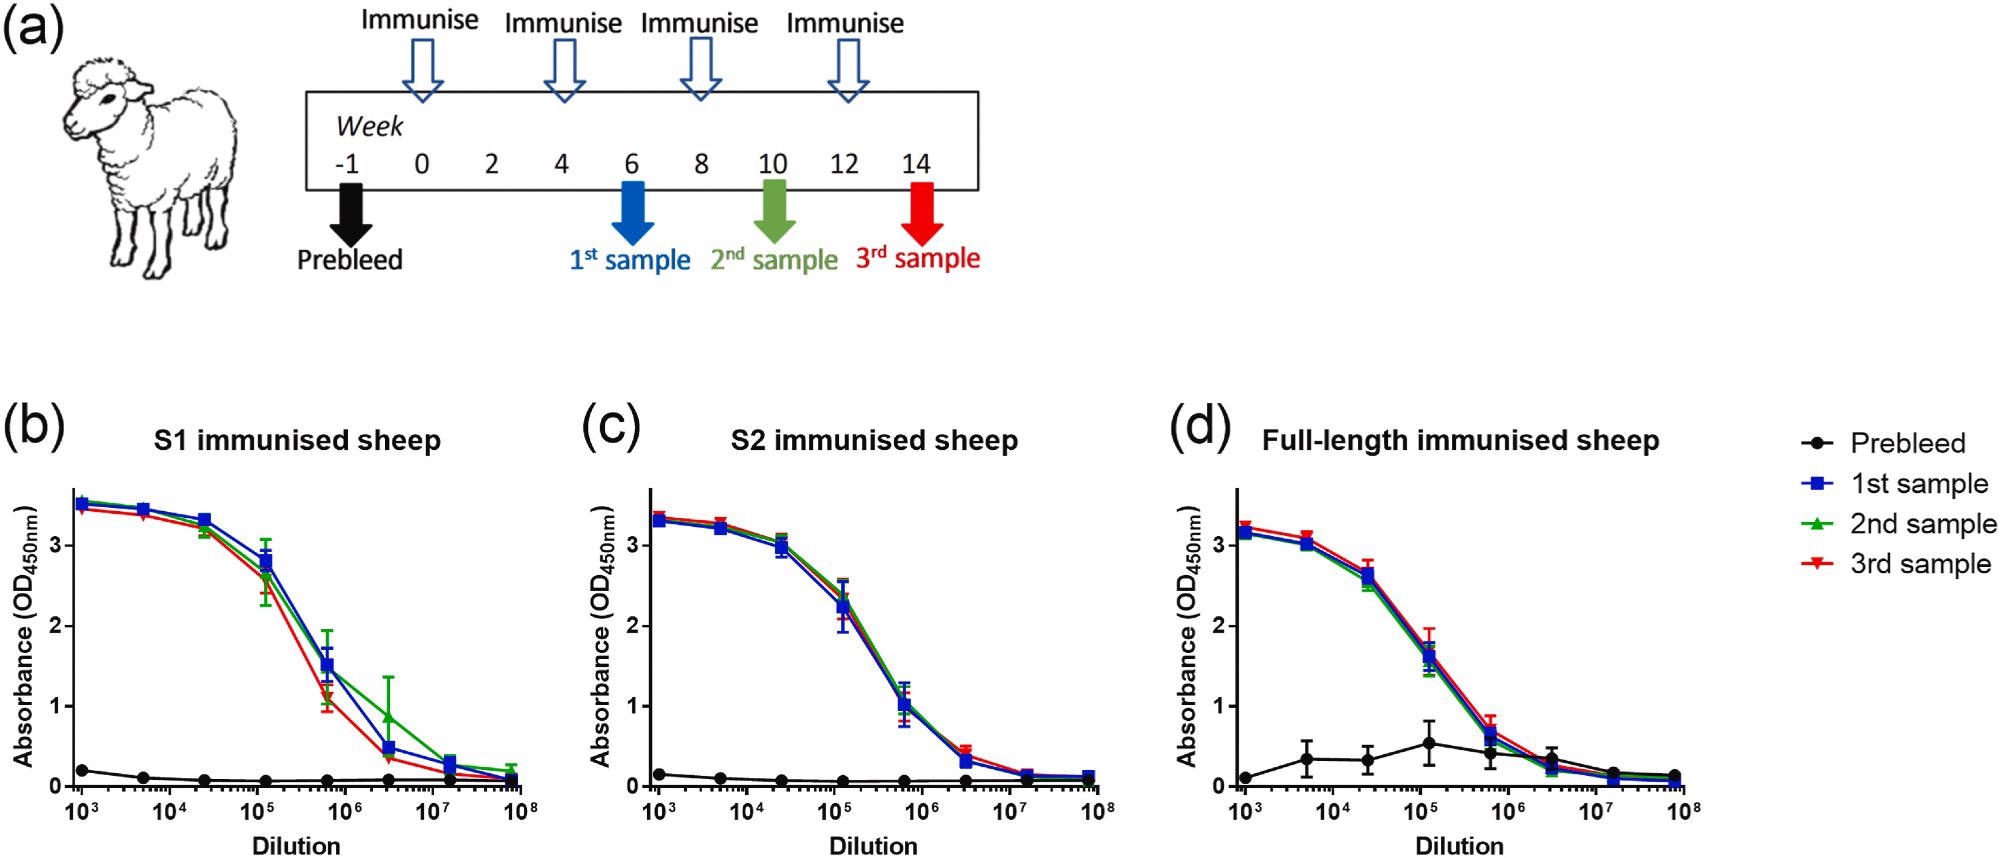 Binding of ovine sera to full-length recombinant SARS-CoV-2 spike protein after immunization with glycoprotein antigens. (a) Outline of study schedule. (b) Reactivity of S1-immunised sheep, n = 3. (c) Reactivity of S2-immunised sheep, n = 3. (d) Reactivity of full-length immunised sheep, n = 6. Lines show mean values with error bars denoting standard error.